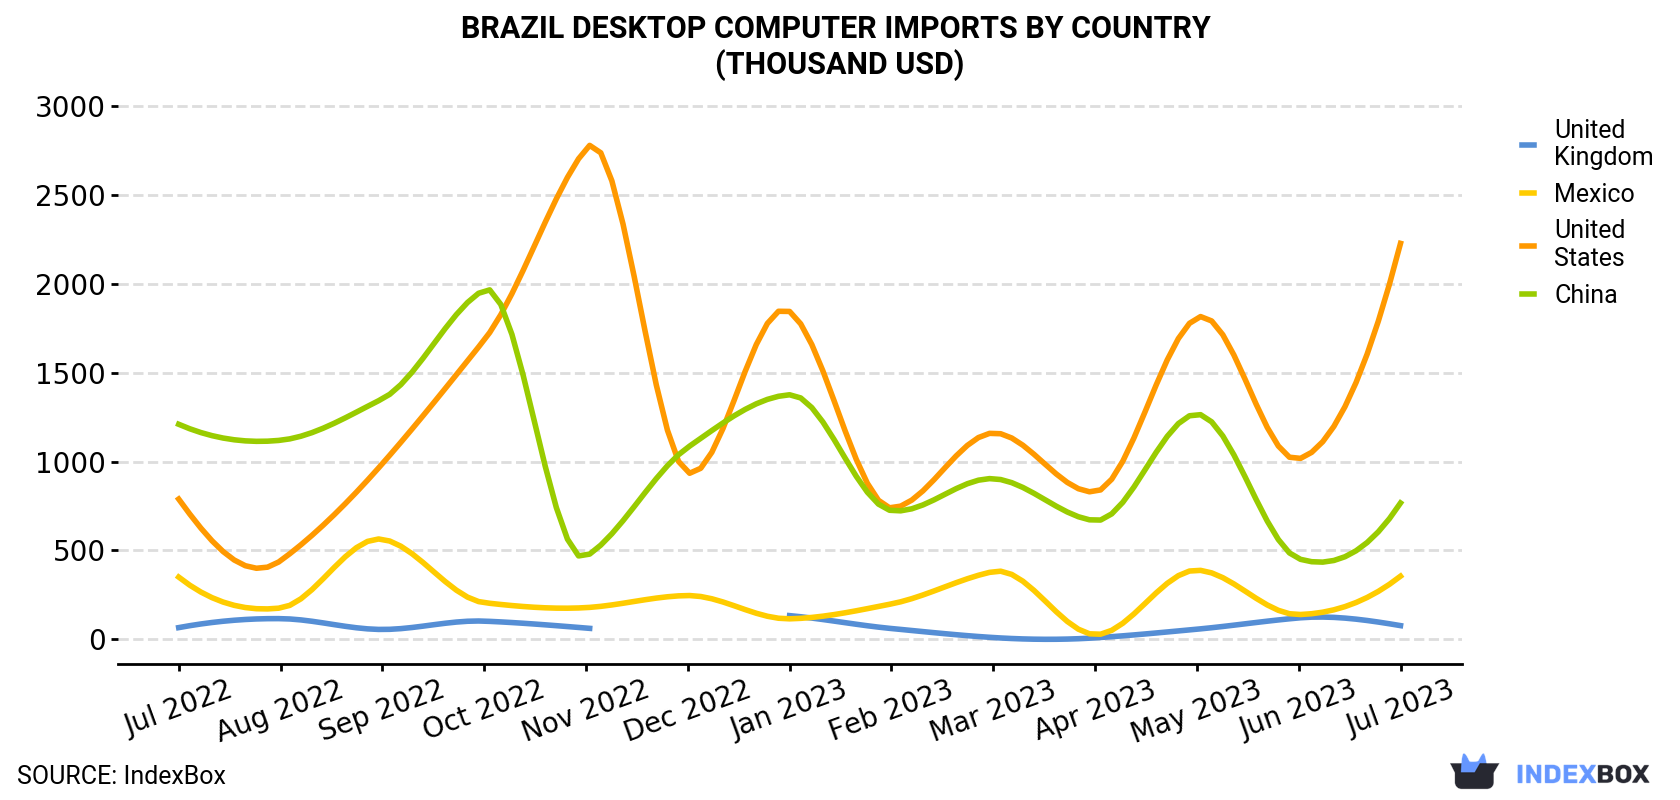 Brazil Desktop Computer Imports By Country (Thousand USD)